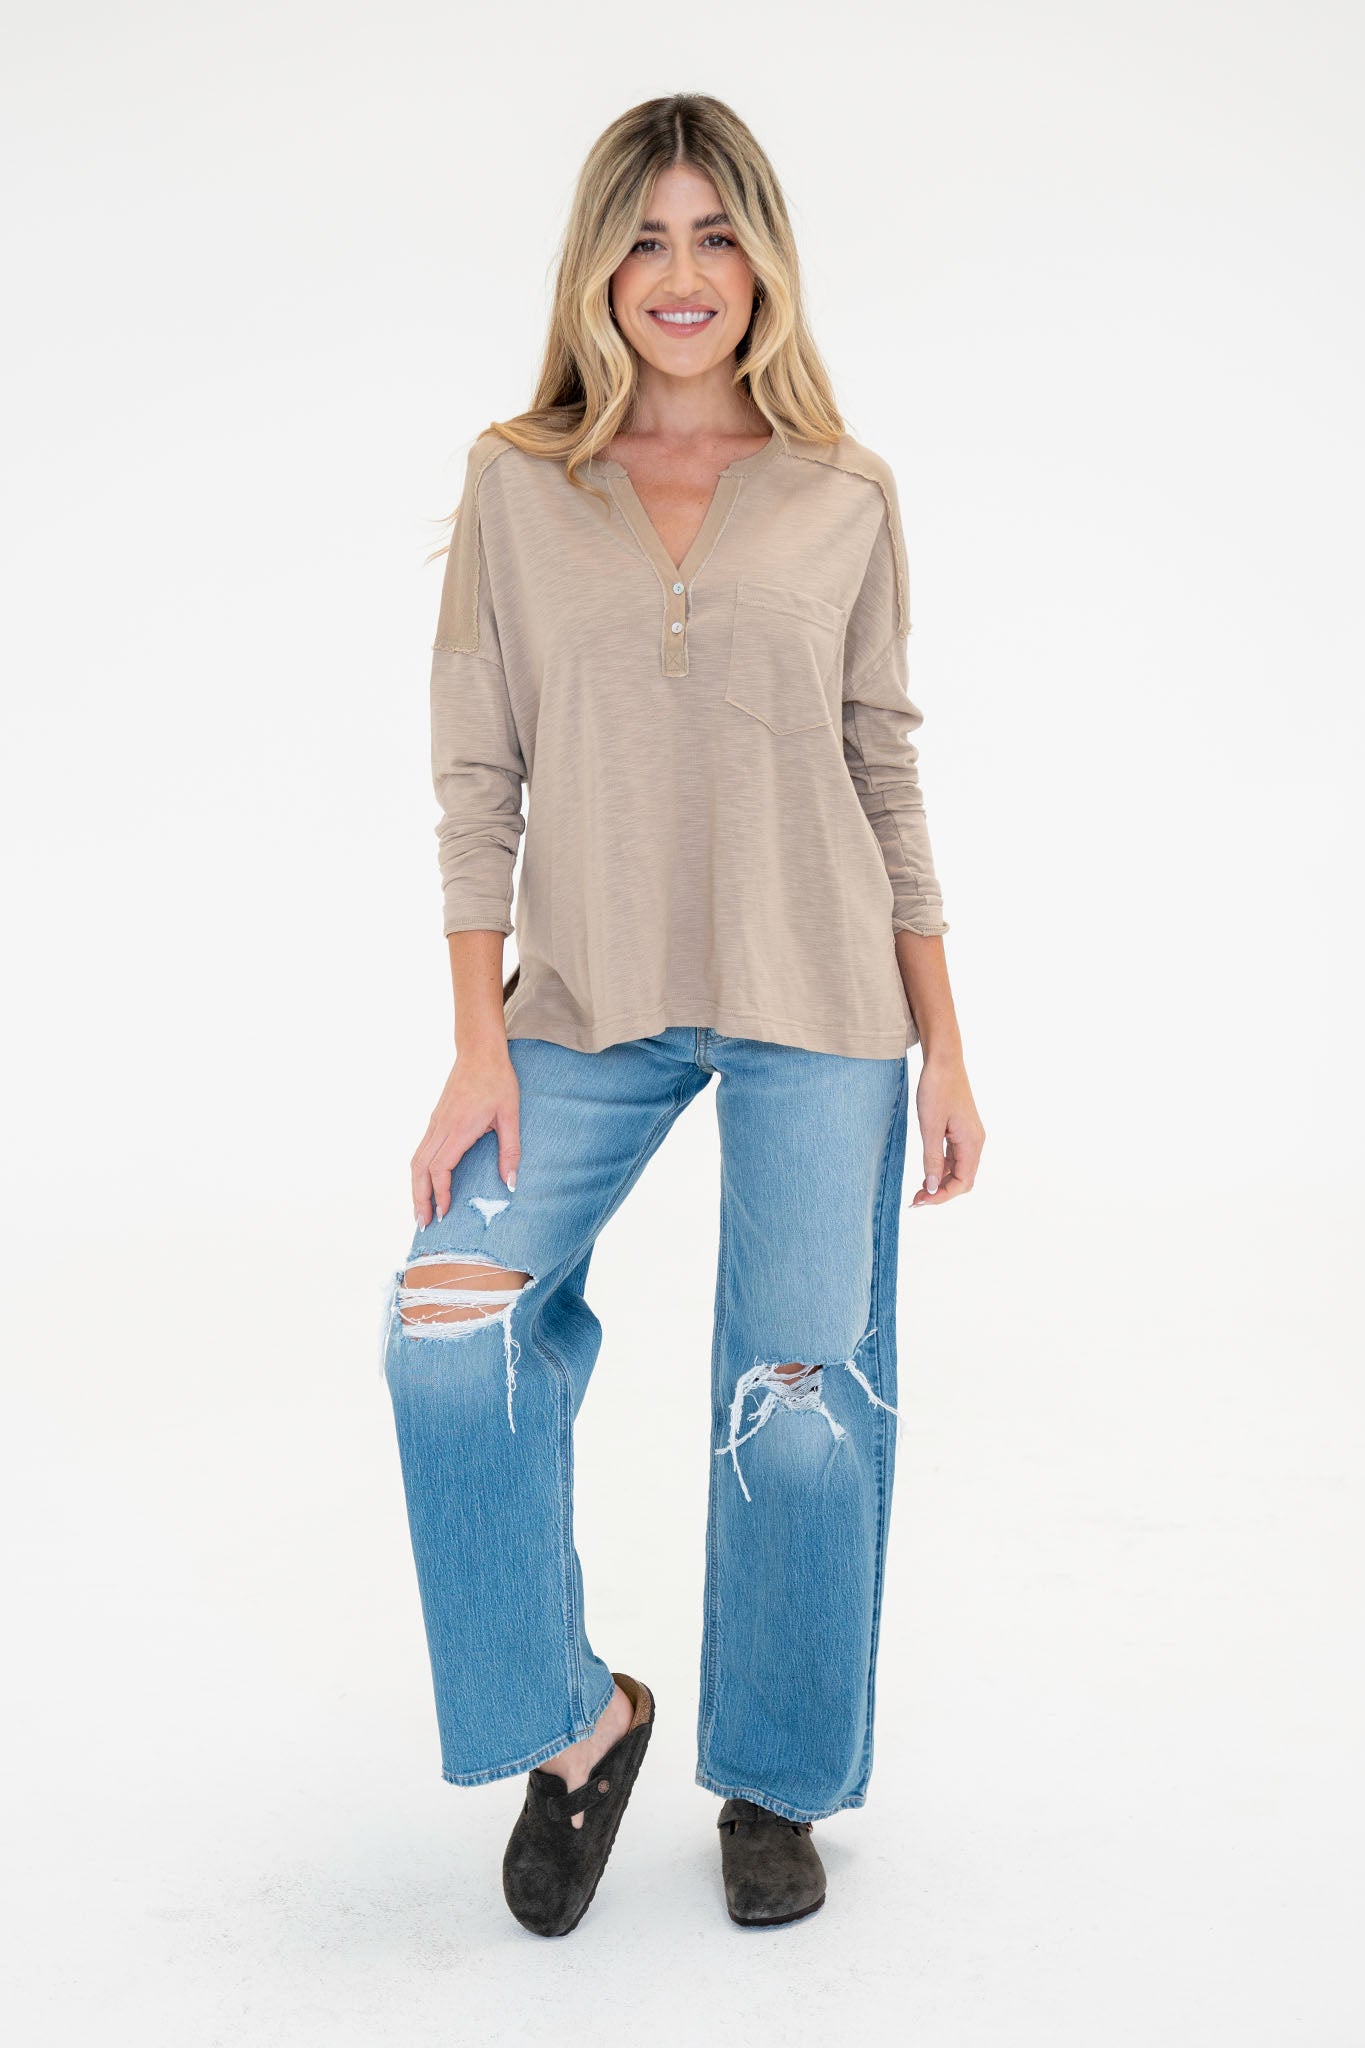 View 2 of Freesia Henley in Taupe, a Tops from Larrea Cove. Detail: .